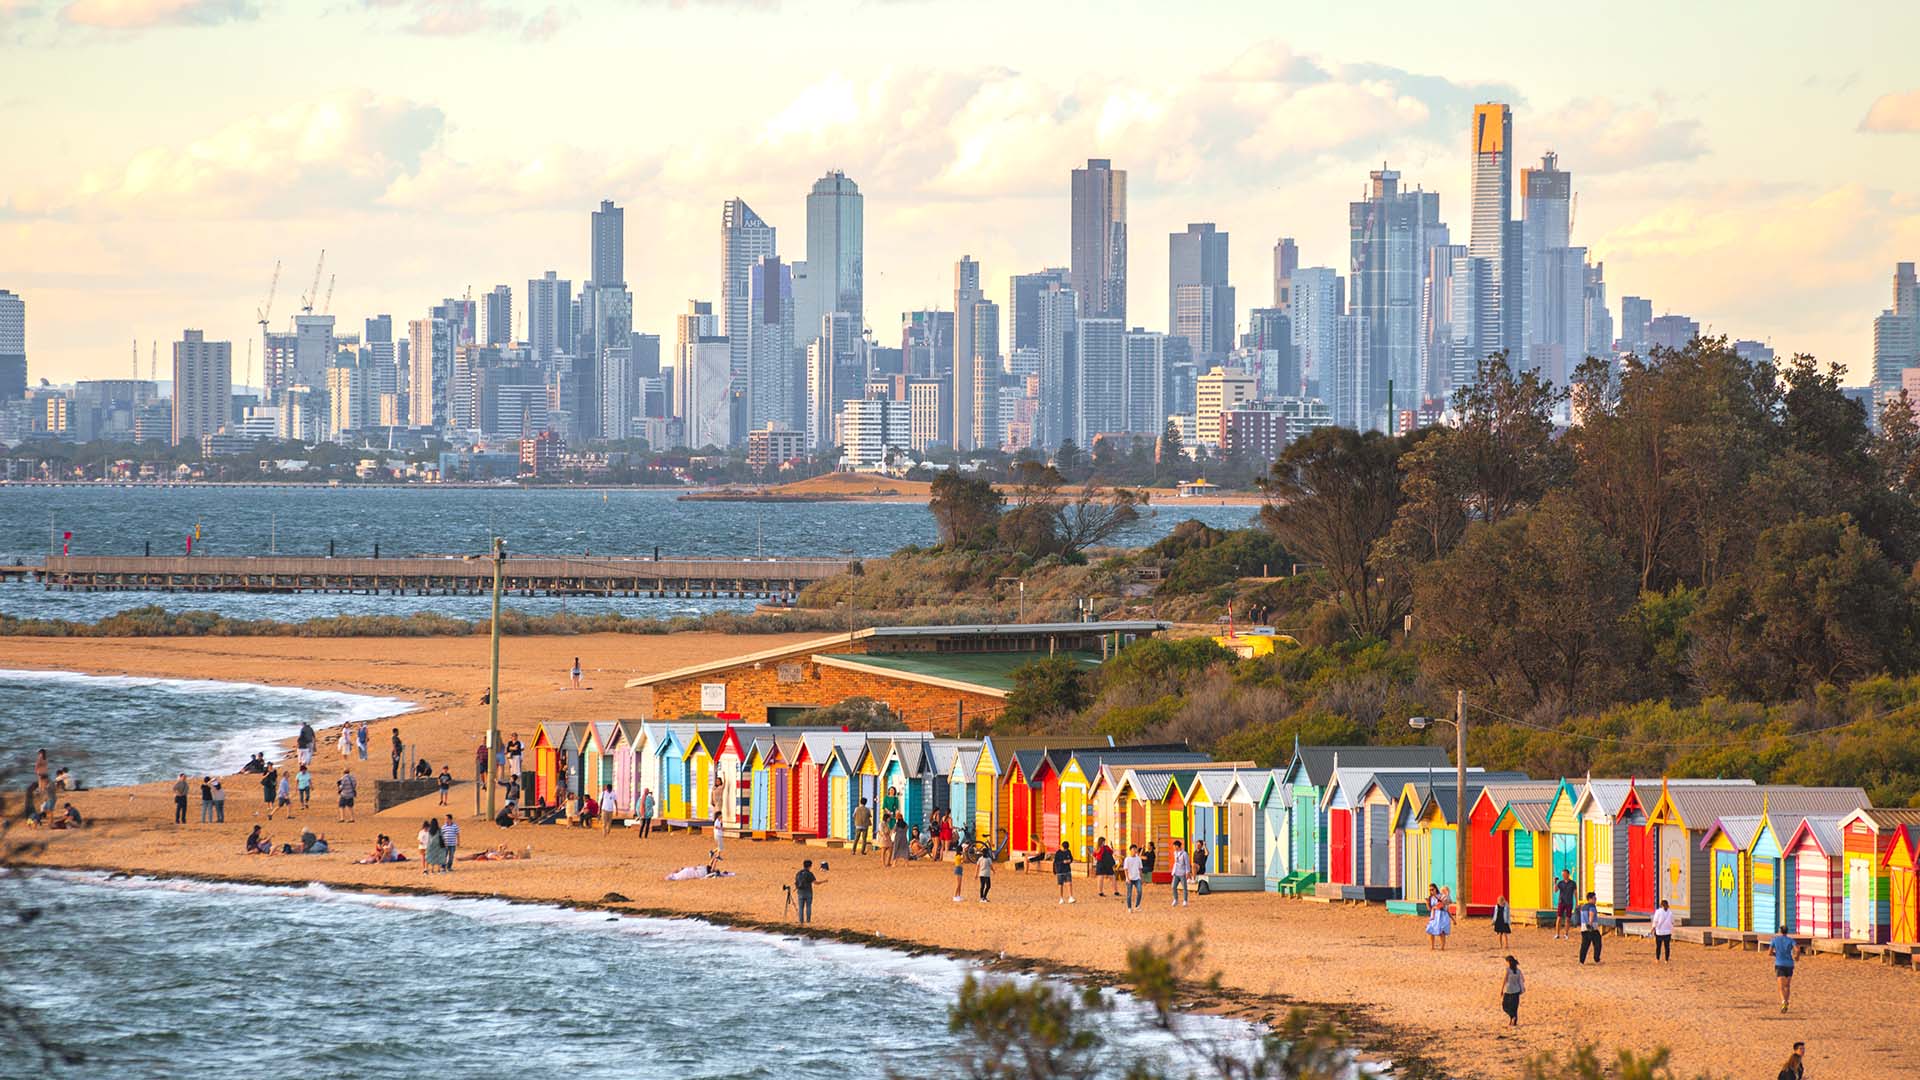 Melbourne Australia skyline from Brighton's beach and colorful bathing boxes